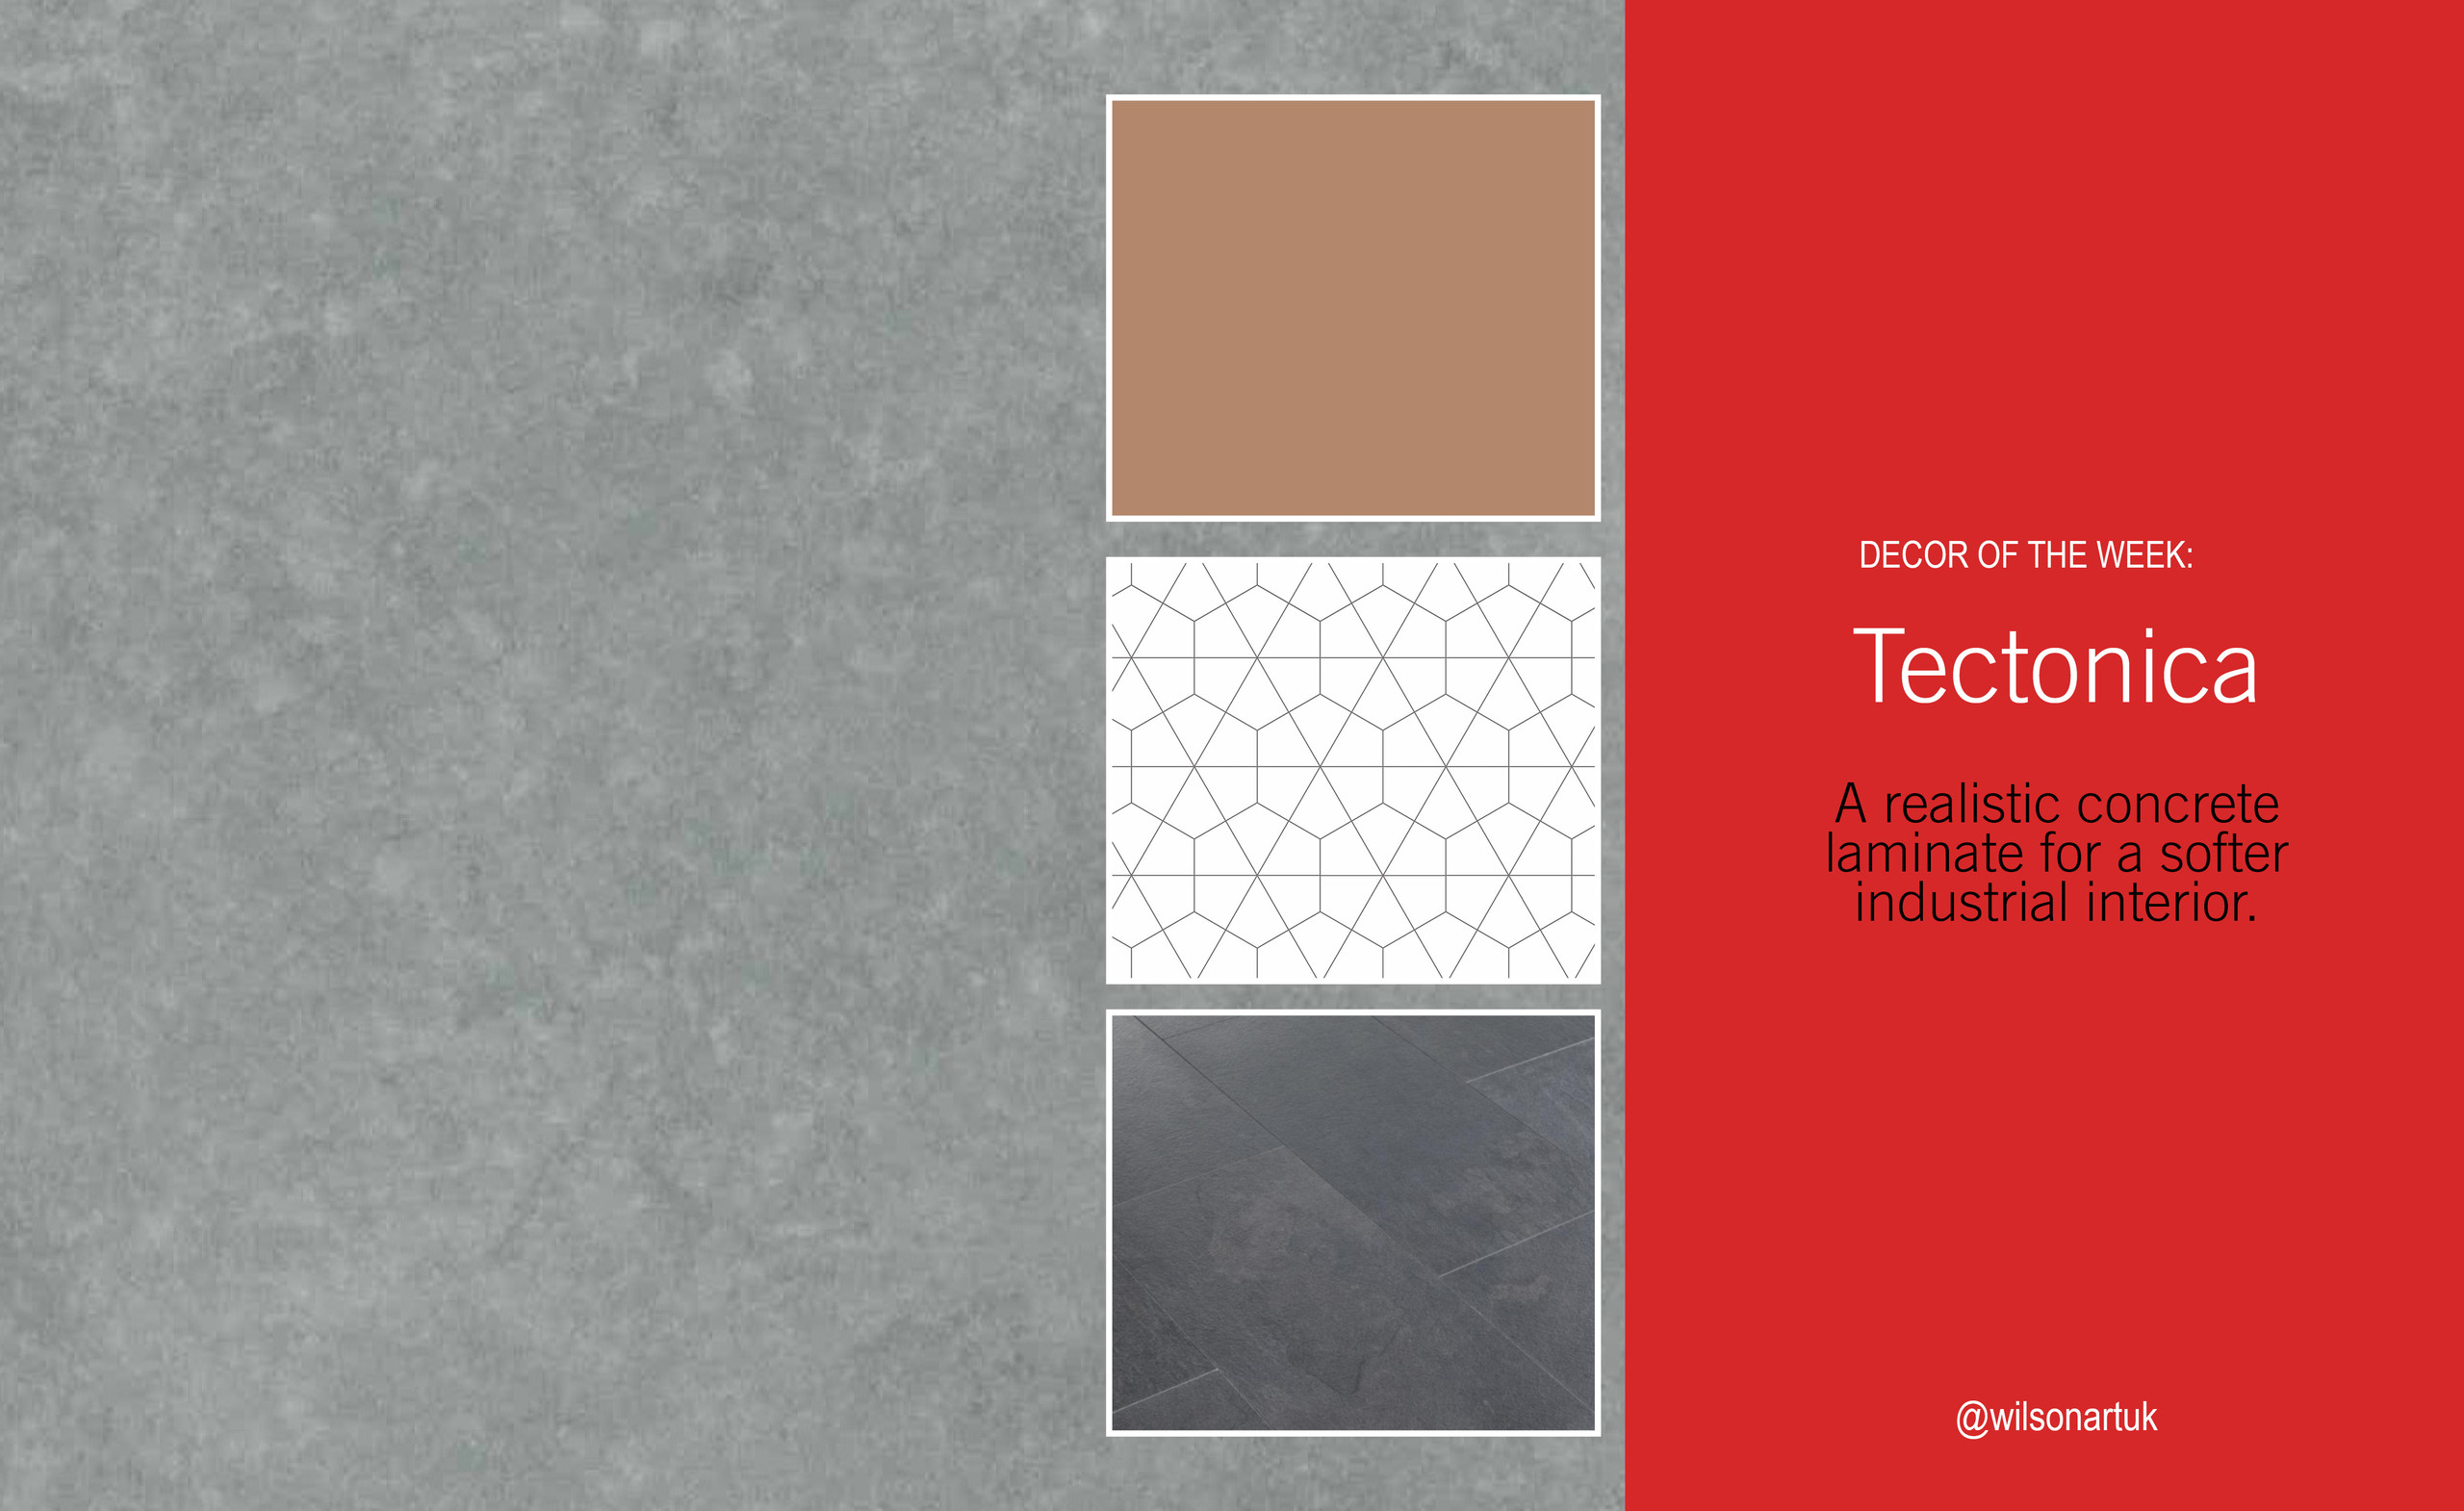 Decor of the Week: Tectonica